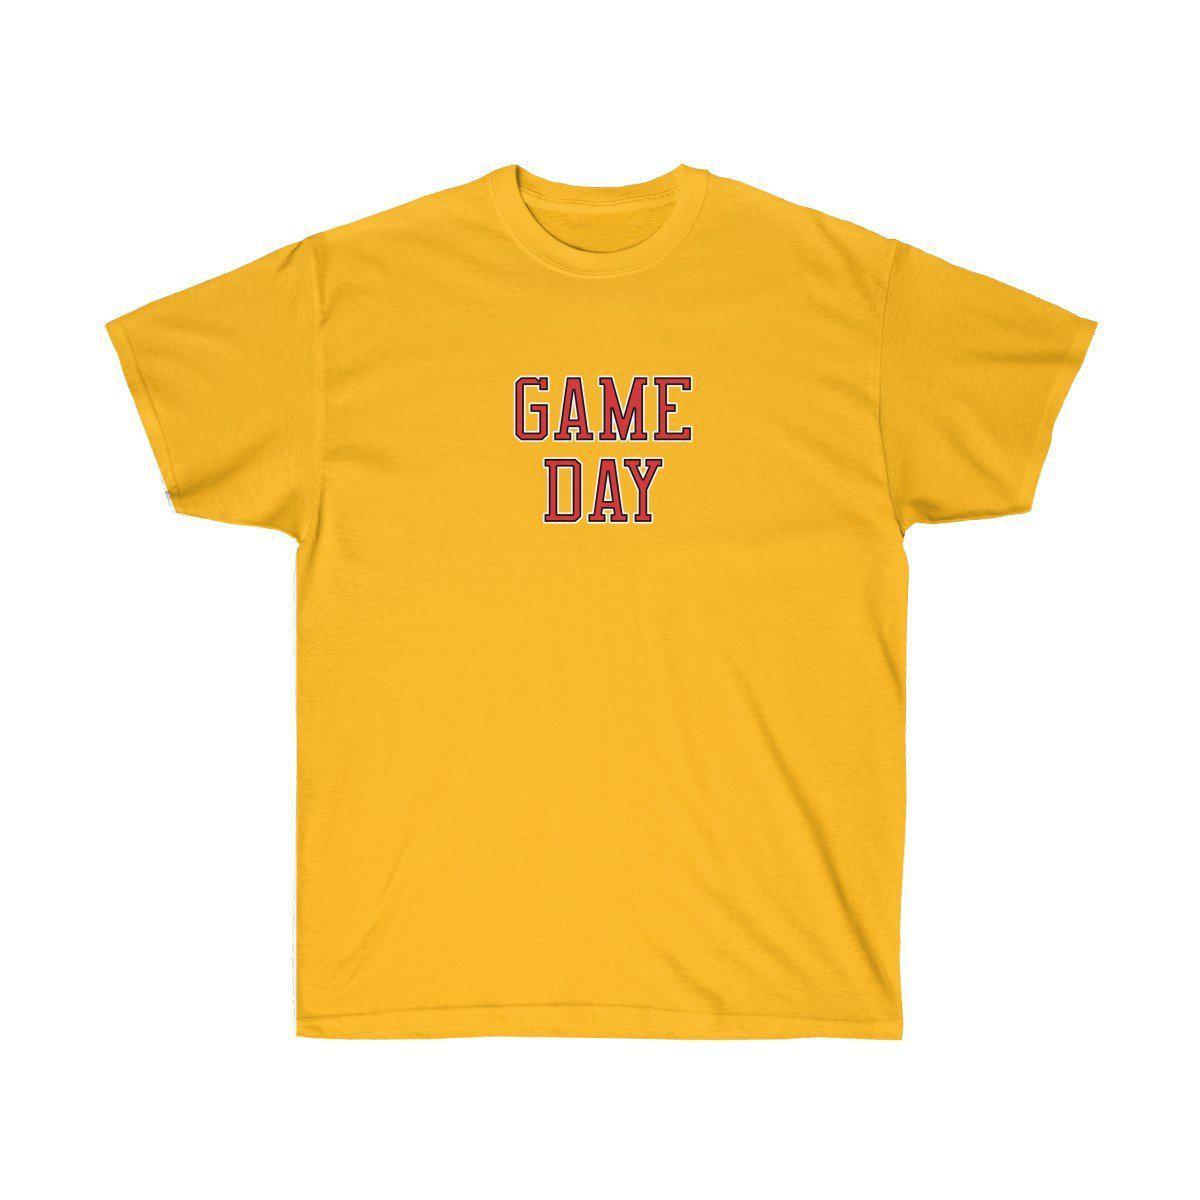 Game Day Tee - Sports T-shirt for Football, Basket, Soccer games-Gold-S-Archethype